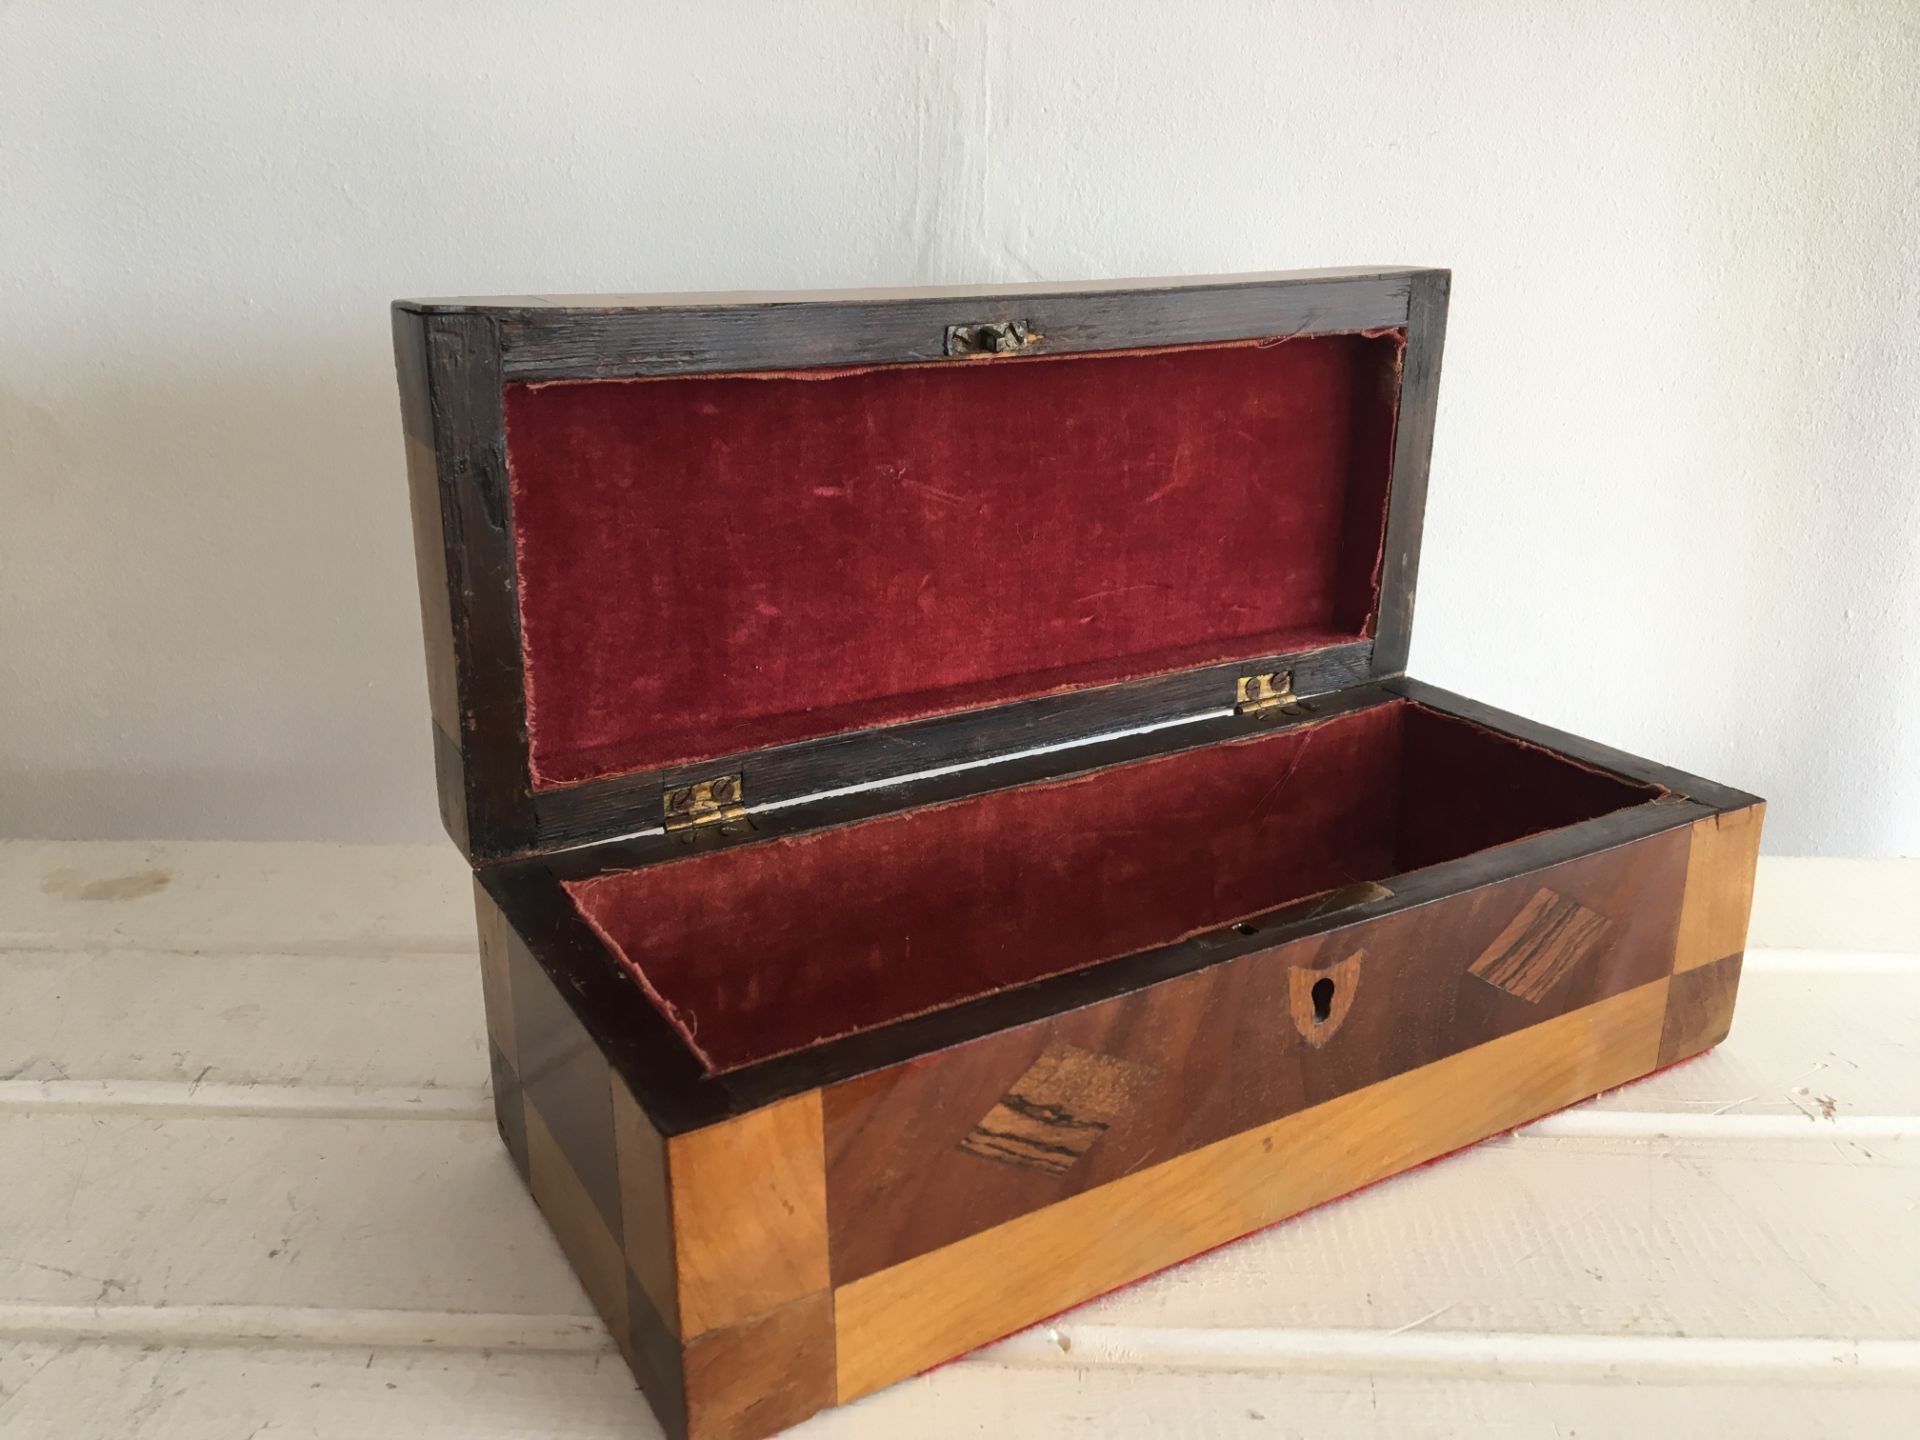 SUPERB ANTIQUE INLAID / MARQUETRY BOX WITH LOCK (NO KEY PRESENT) AND RED VELVET LINING. MEASURES